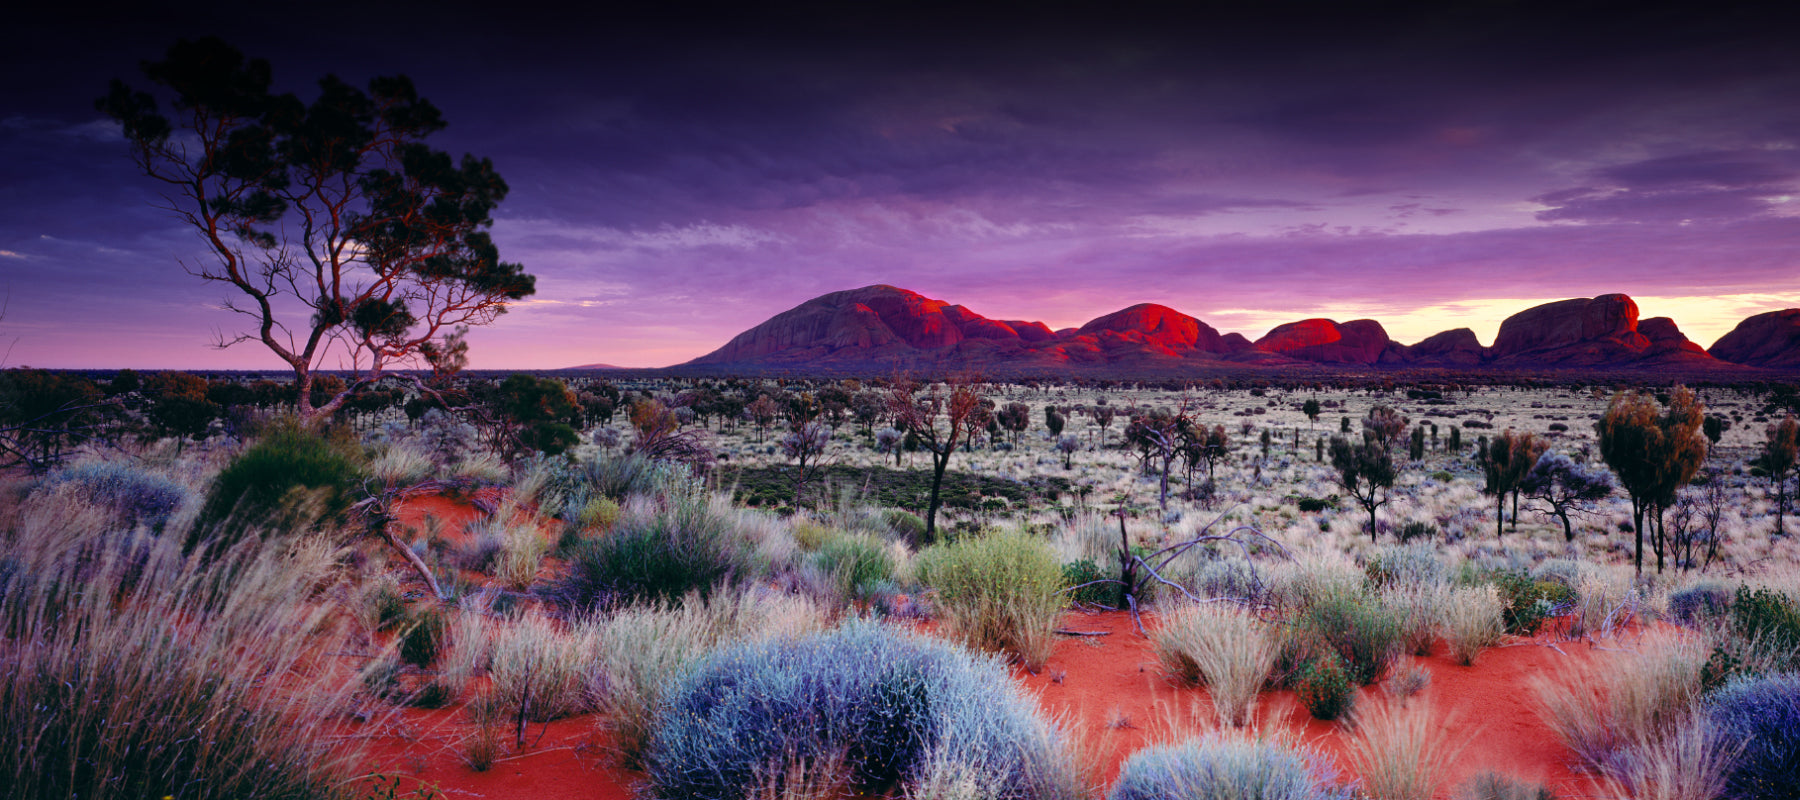 Multi color sunrise in the brush filled desert with the stone formation of Kata Tjuta National Park Australia in the background